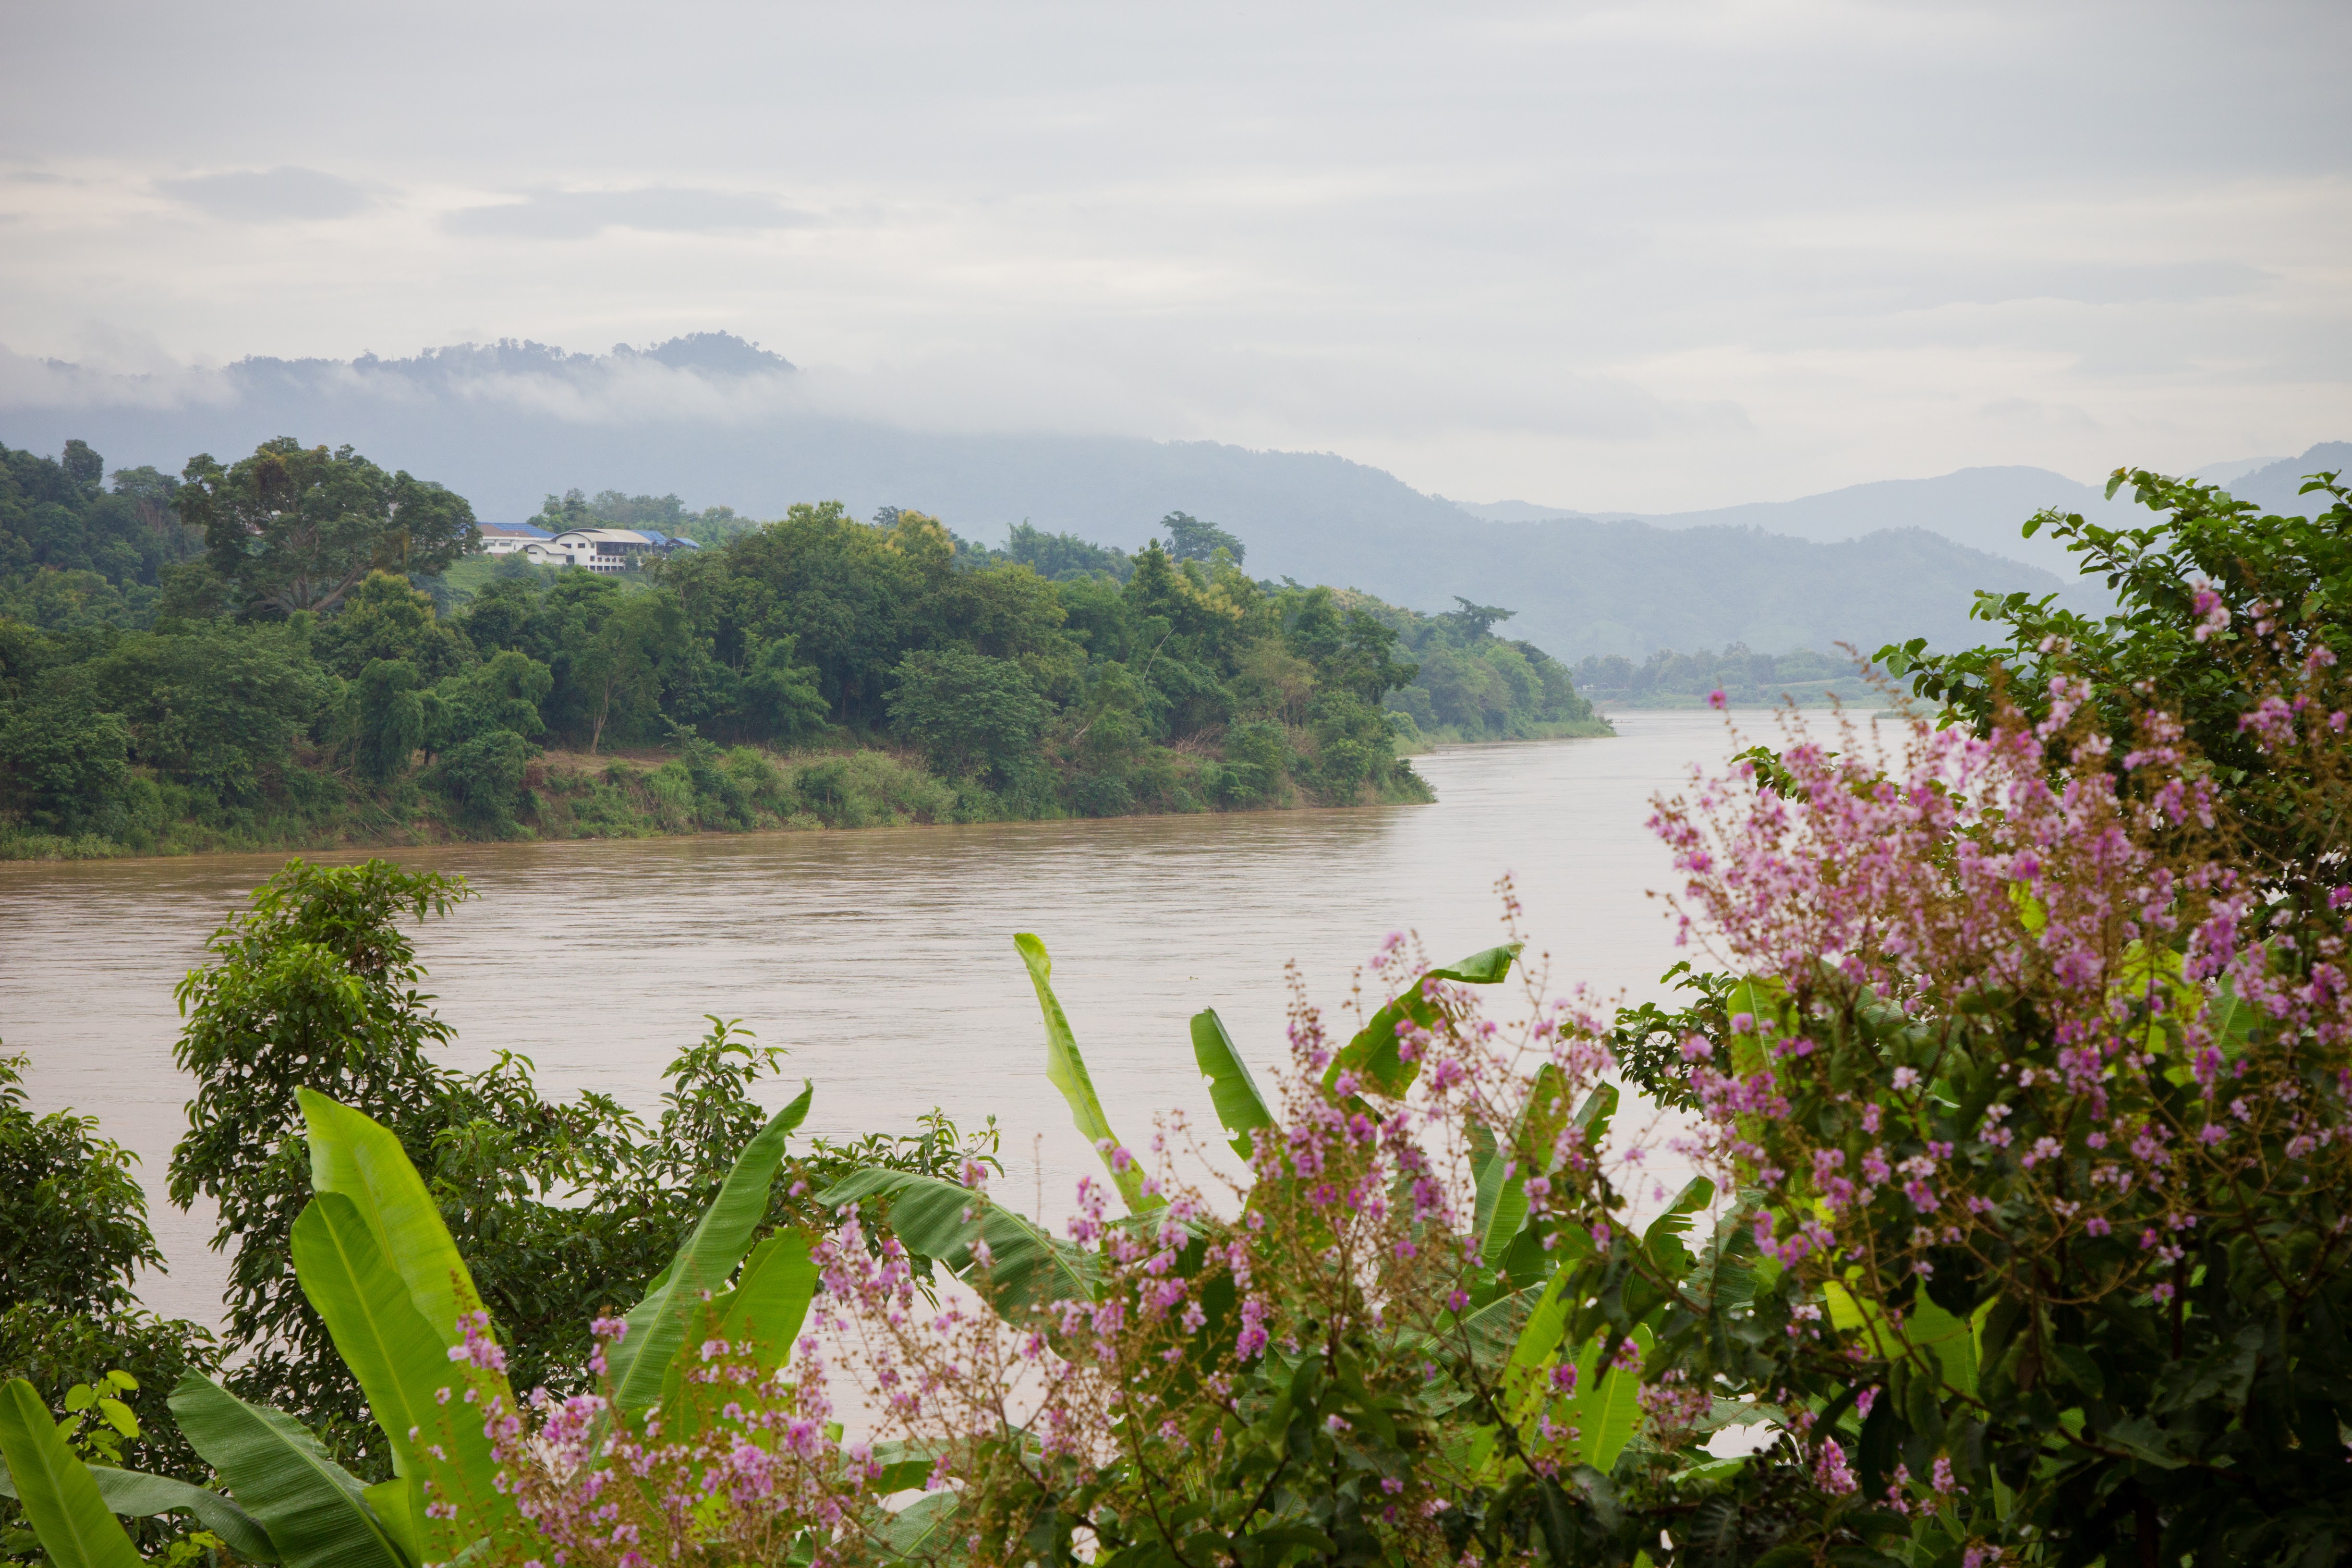 The Mekong River's rich biodiversity is threatened by megaprojects.